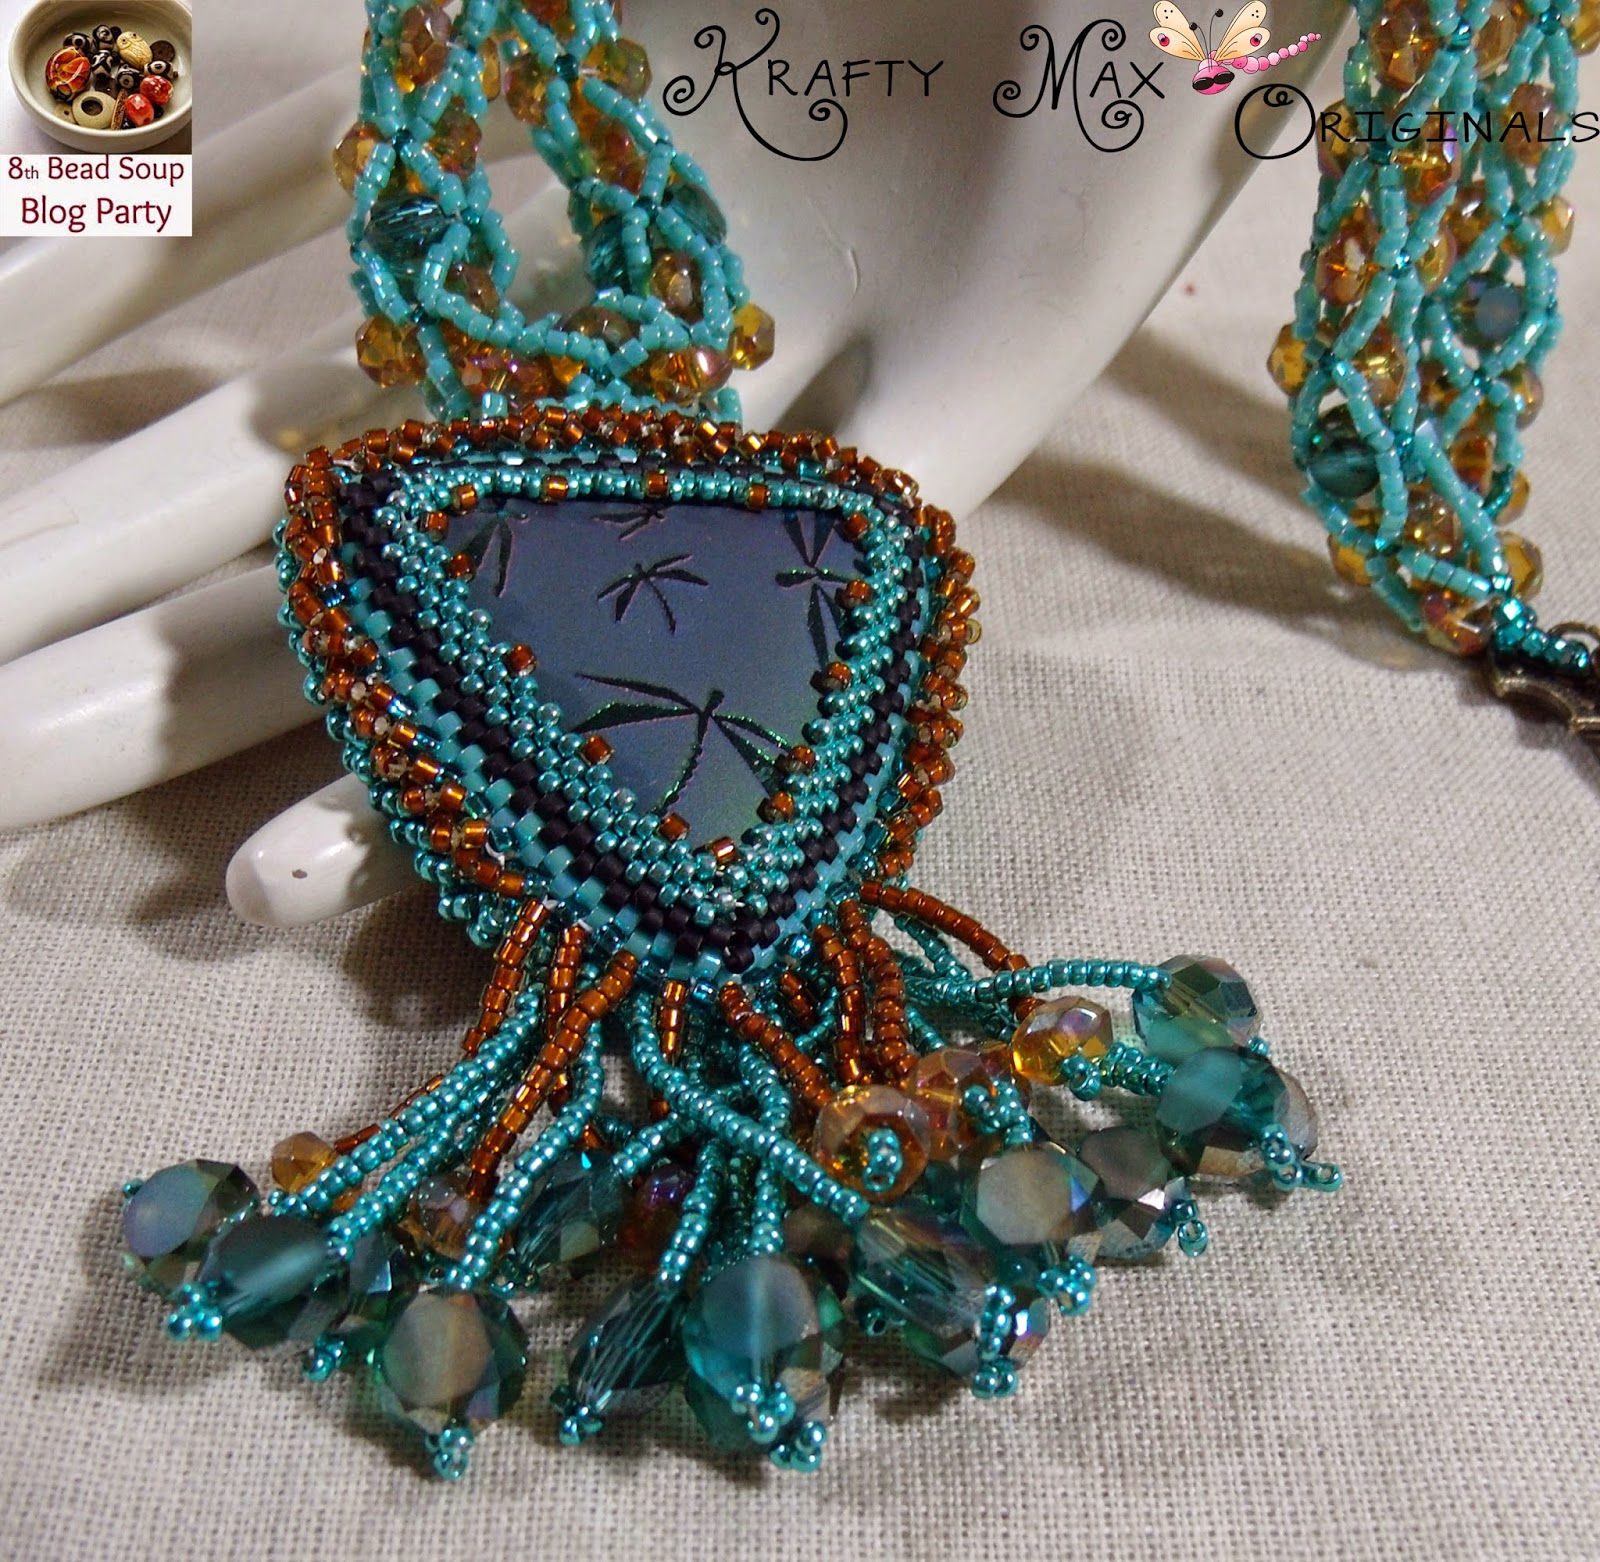 http://www.artfire.com/ext/shop/product_view/KraftyMax/9265070/8th_bead_soup_blog_party_-_teal_dragonfly_beadwoven_neclace_set/handmade/jewelry/sets/beadwoven